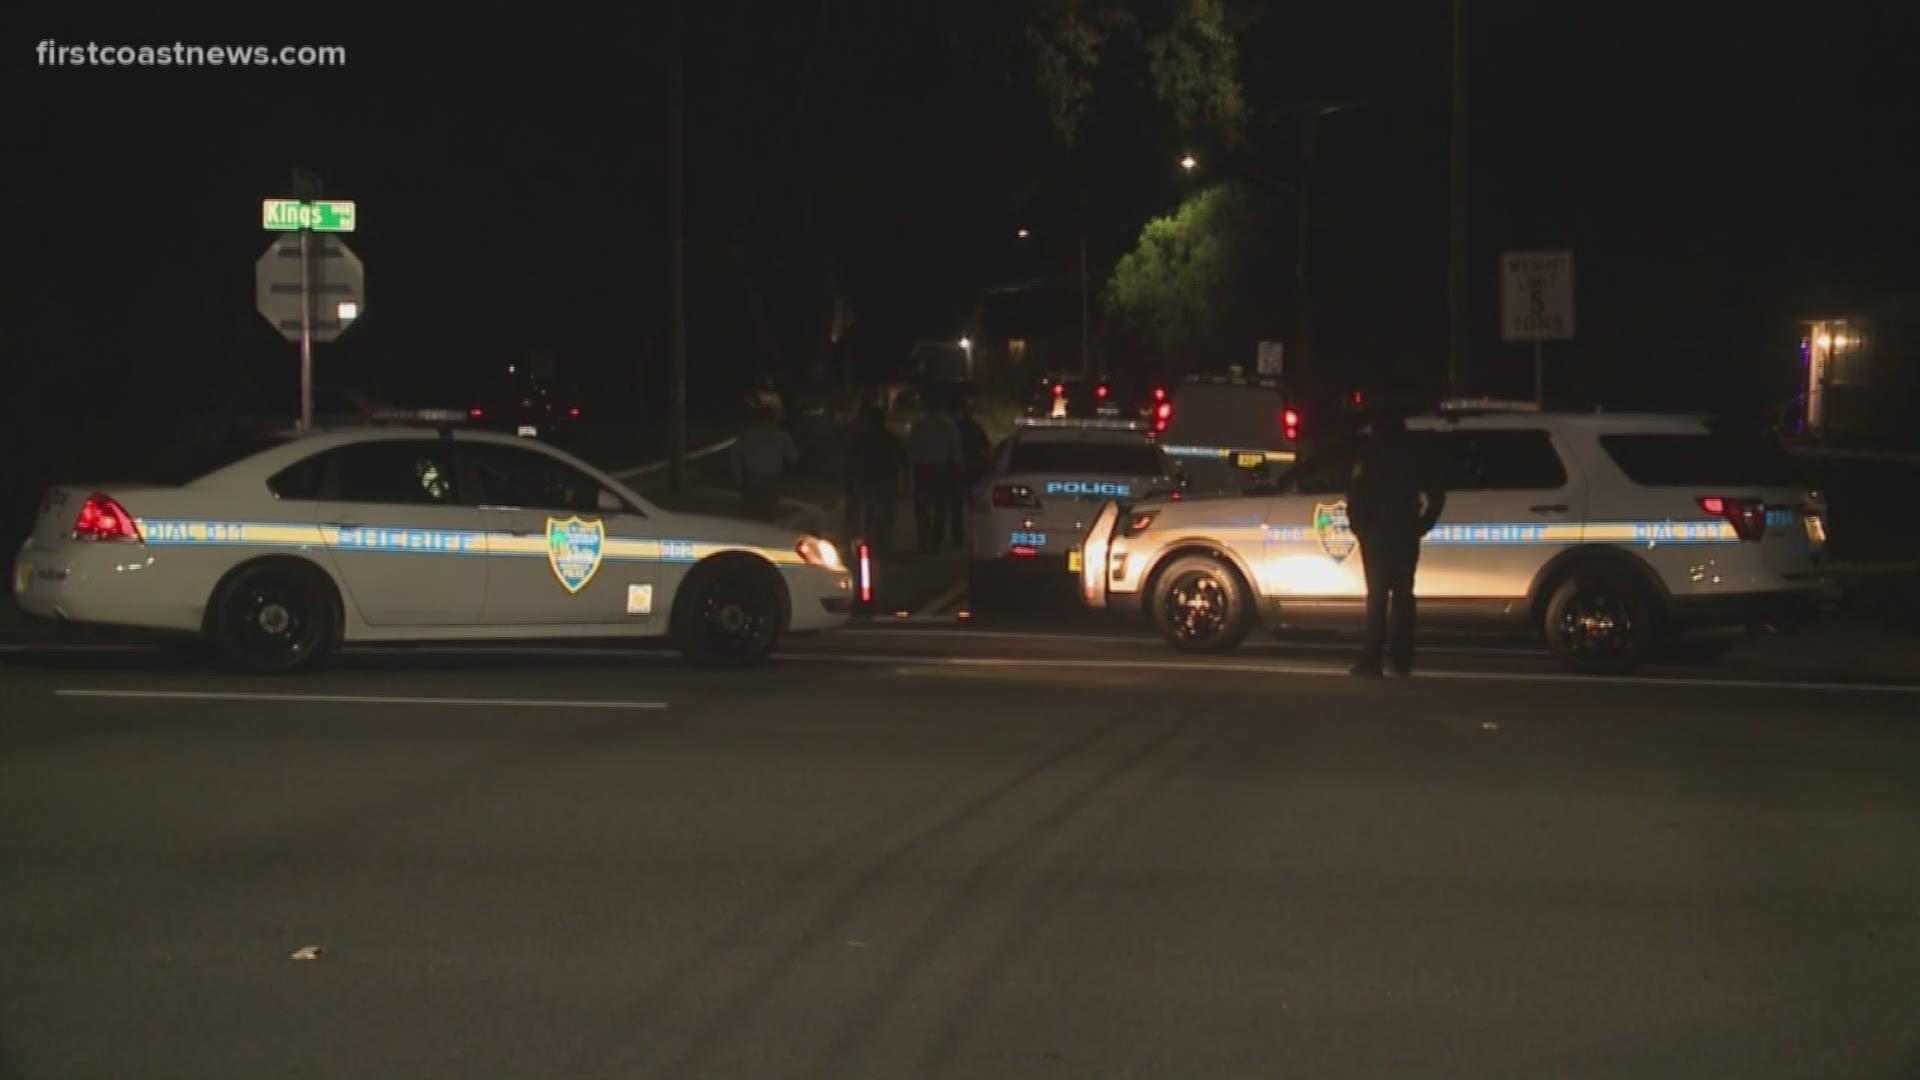 The Jacksonville Sheriff's Office is on the scene of a reported shooting in the Grand Park neighborhood Monday night.